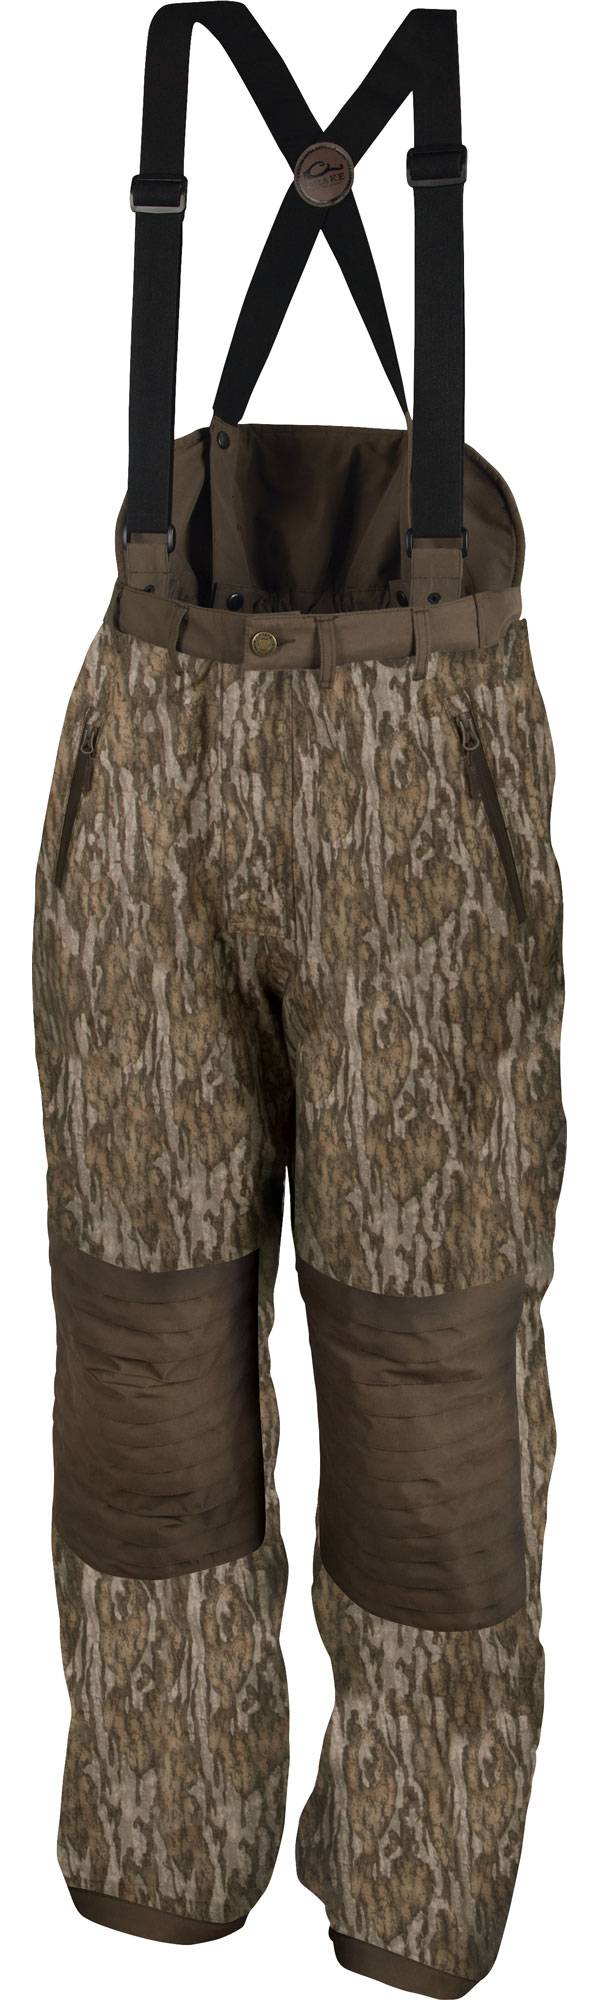 Drake Waterfowl Men's Guardian Elite High-Back Insulated Hunting Pants product image